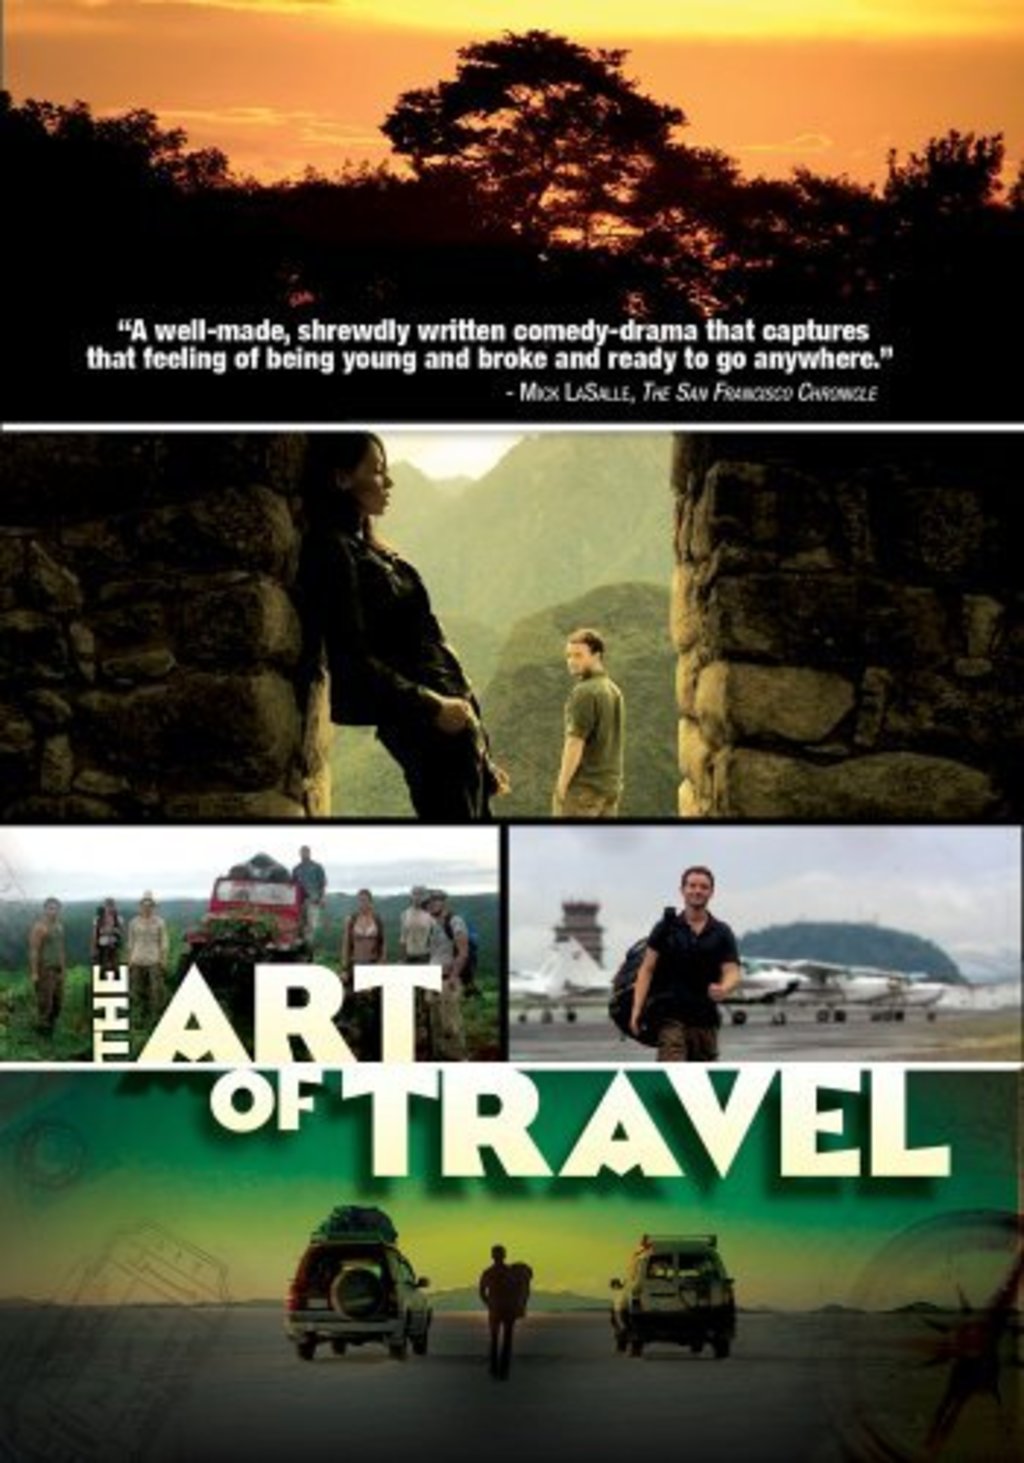 Watch The Art of Travel on Netflix Today!